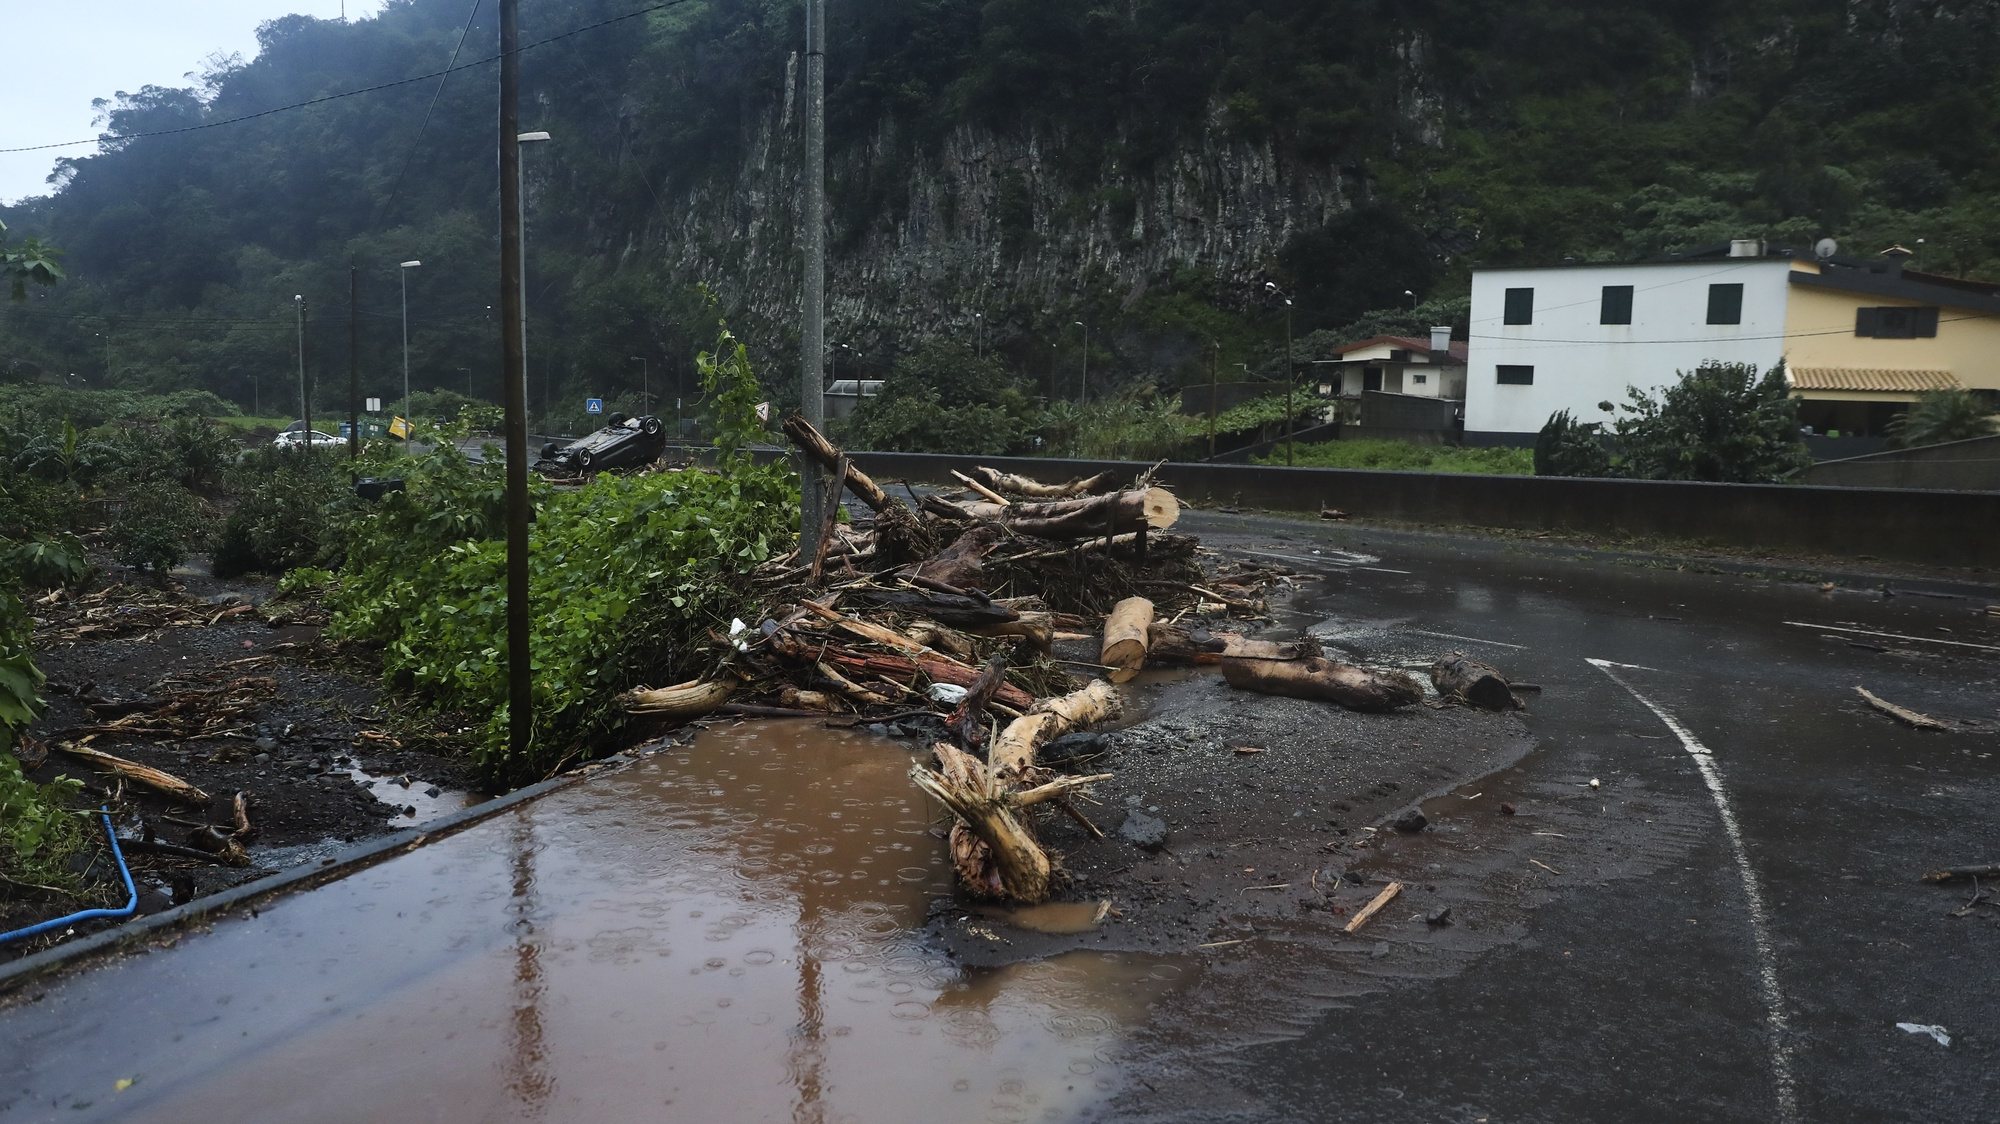 The municipality of Machico in the eastern of Madeira, has been one of the most affected by the bad weather that is felt today throughout the archipelago of Madeira, Machico, Madeira Island, Portugal, 07 January 2021. There is already damage caused in at least two cars that were dragged following the overflow of a watercourse, and a family removed from their homes as a precaution. HOMEM DE GOUVEIA/LUSA